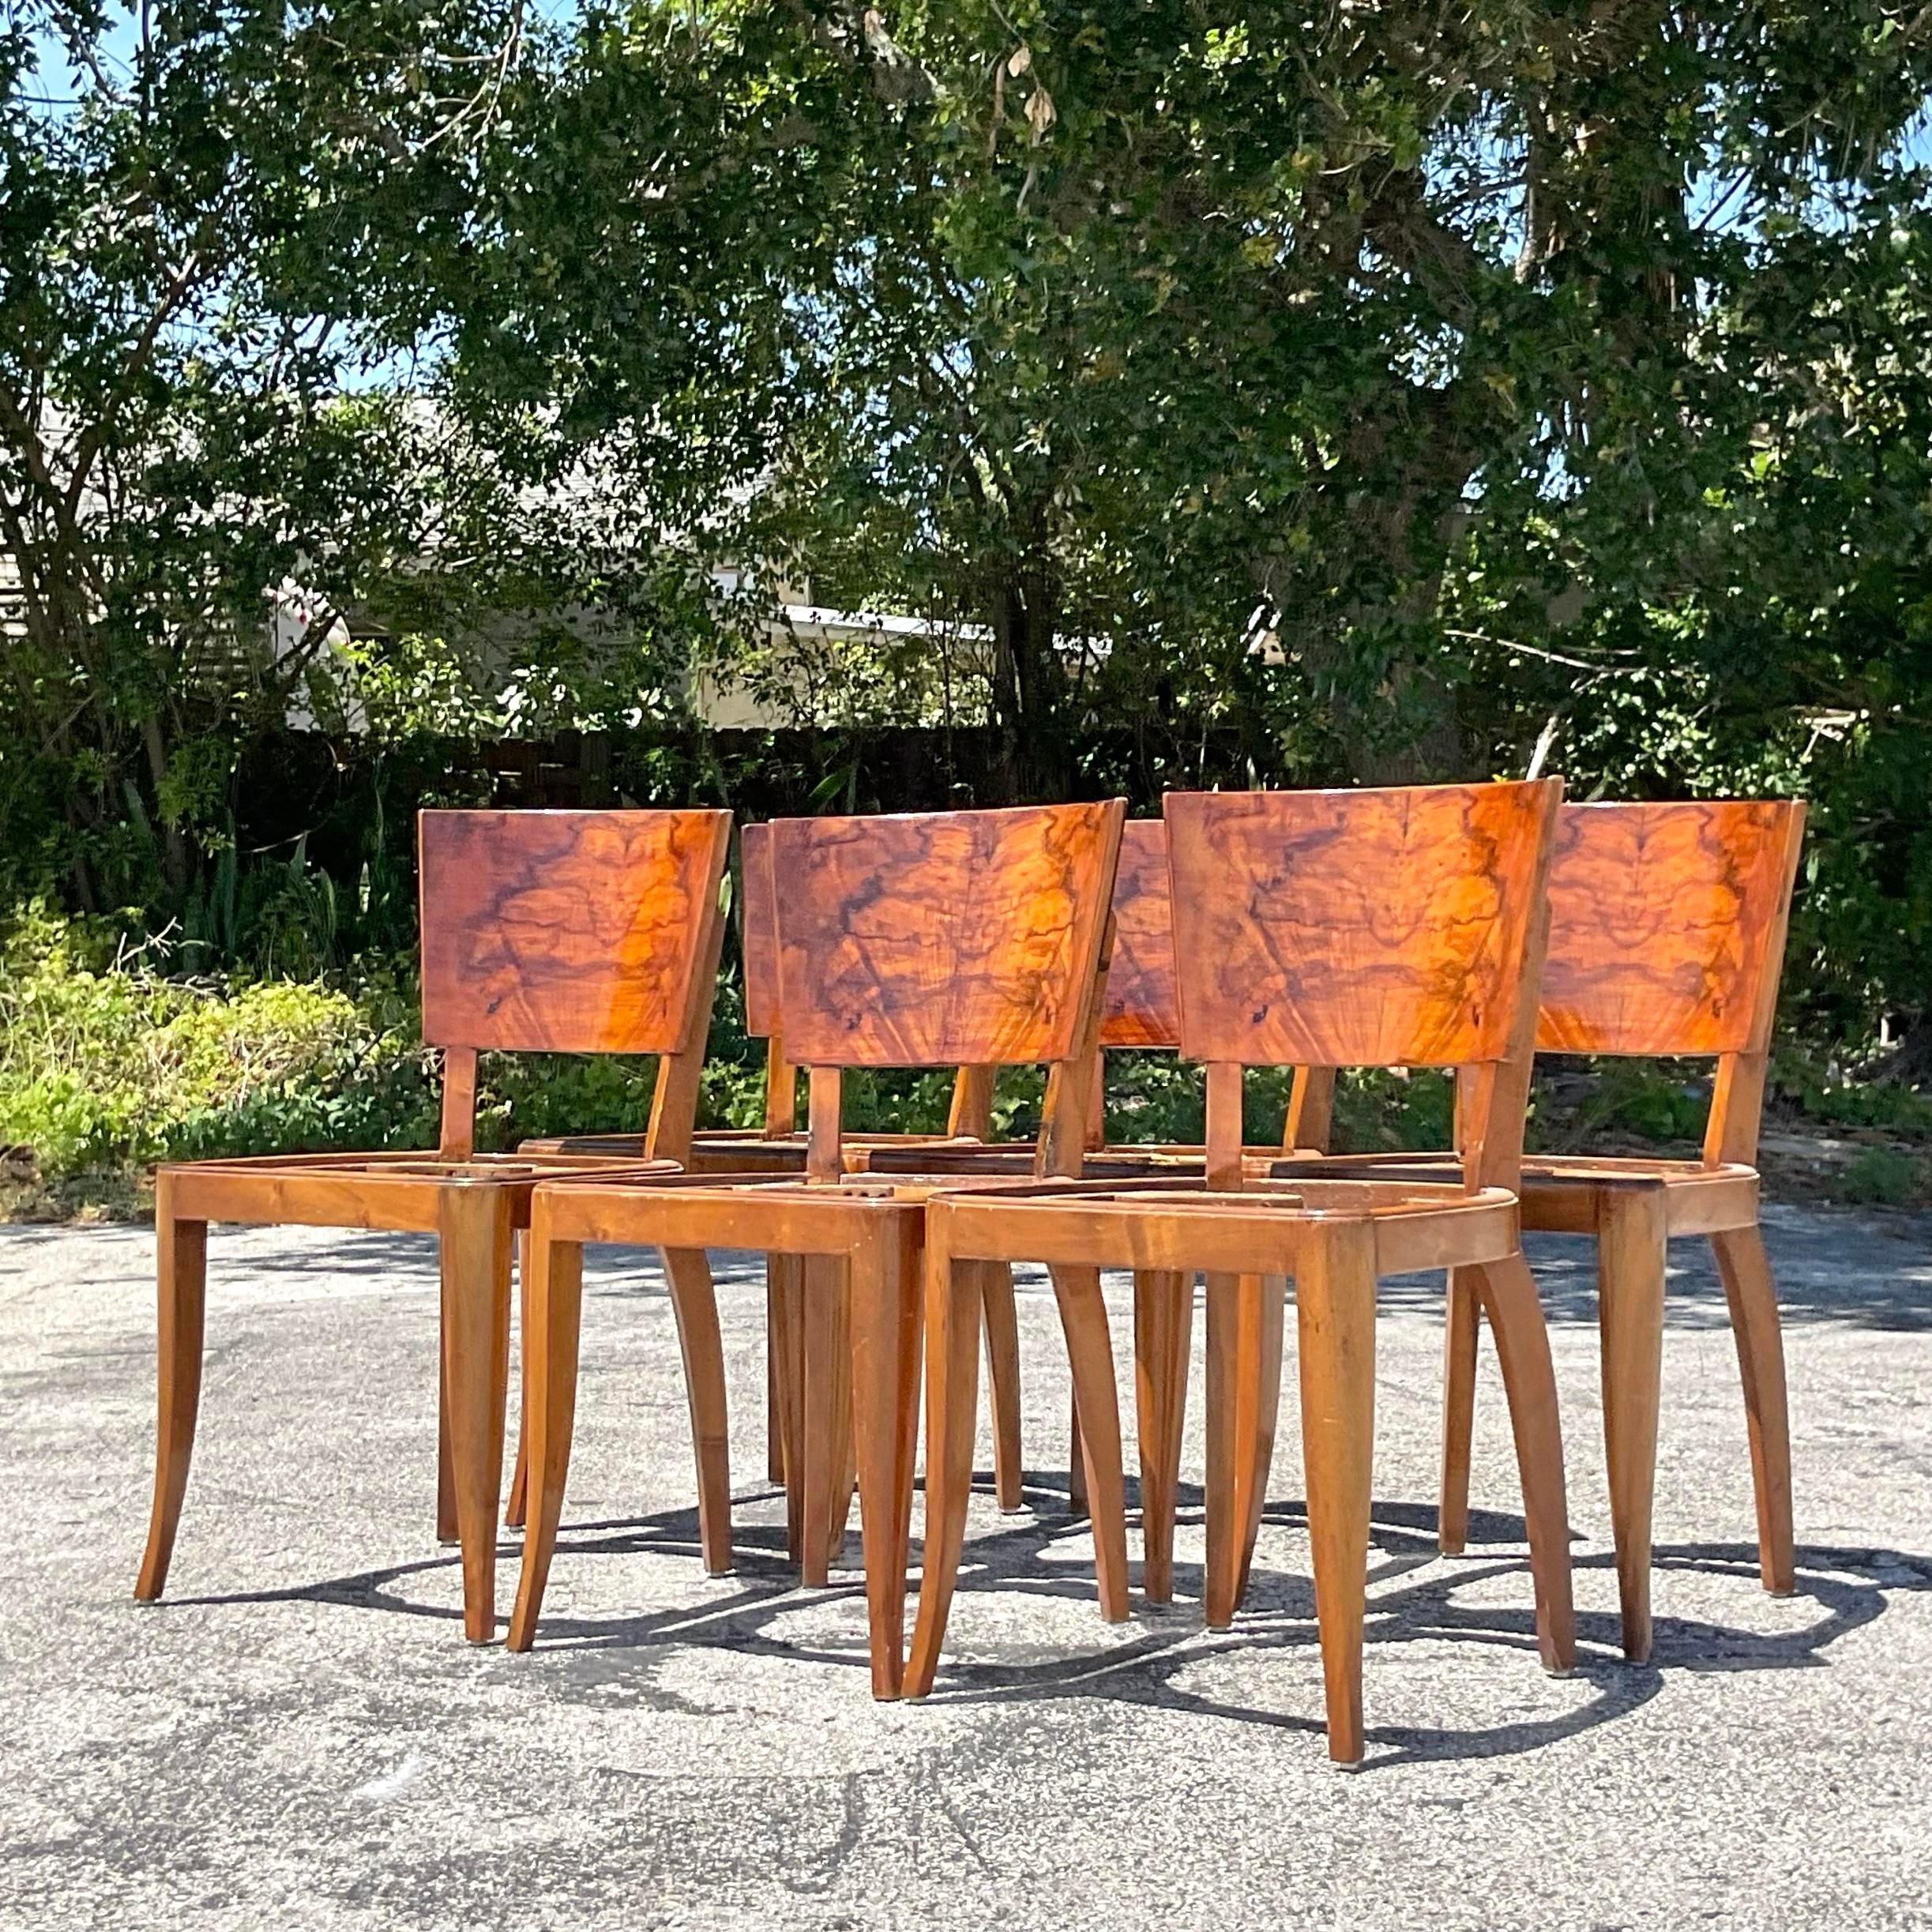 Vintage Deco Burl Wood Dining Chairs - Set of 6 For Sale 1